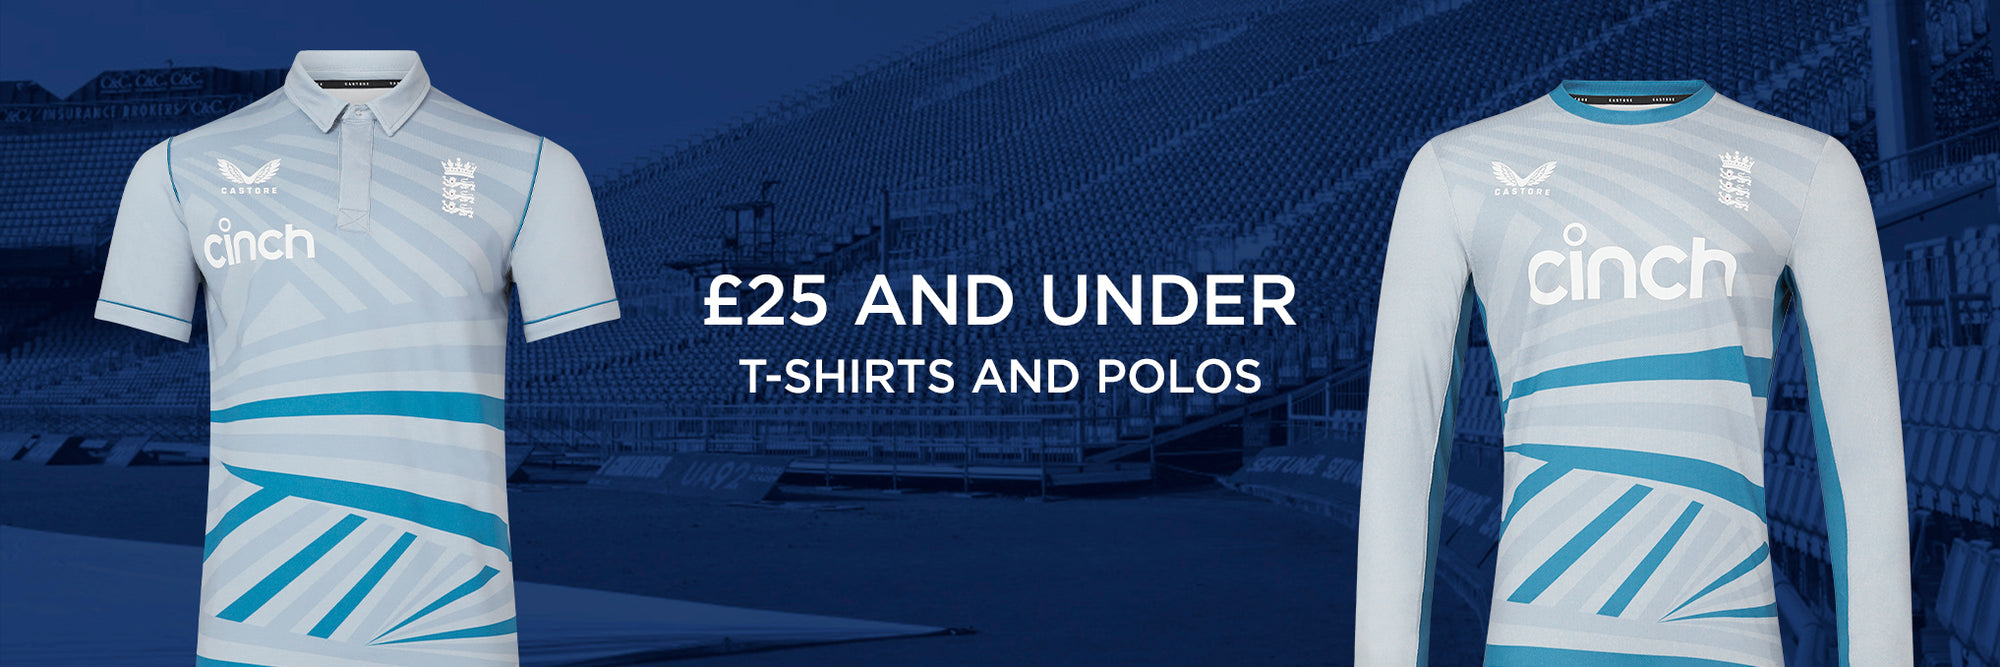 Special Offer - T-Shirts and Polos under £25